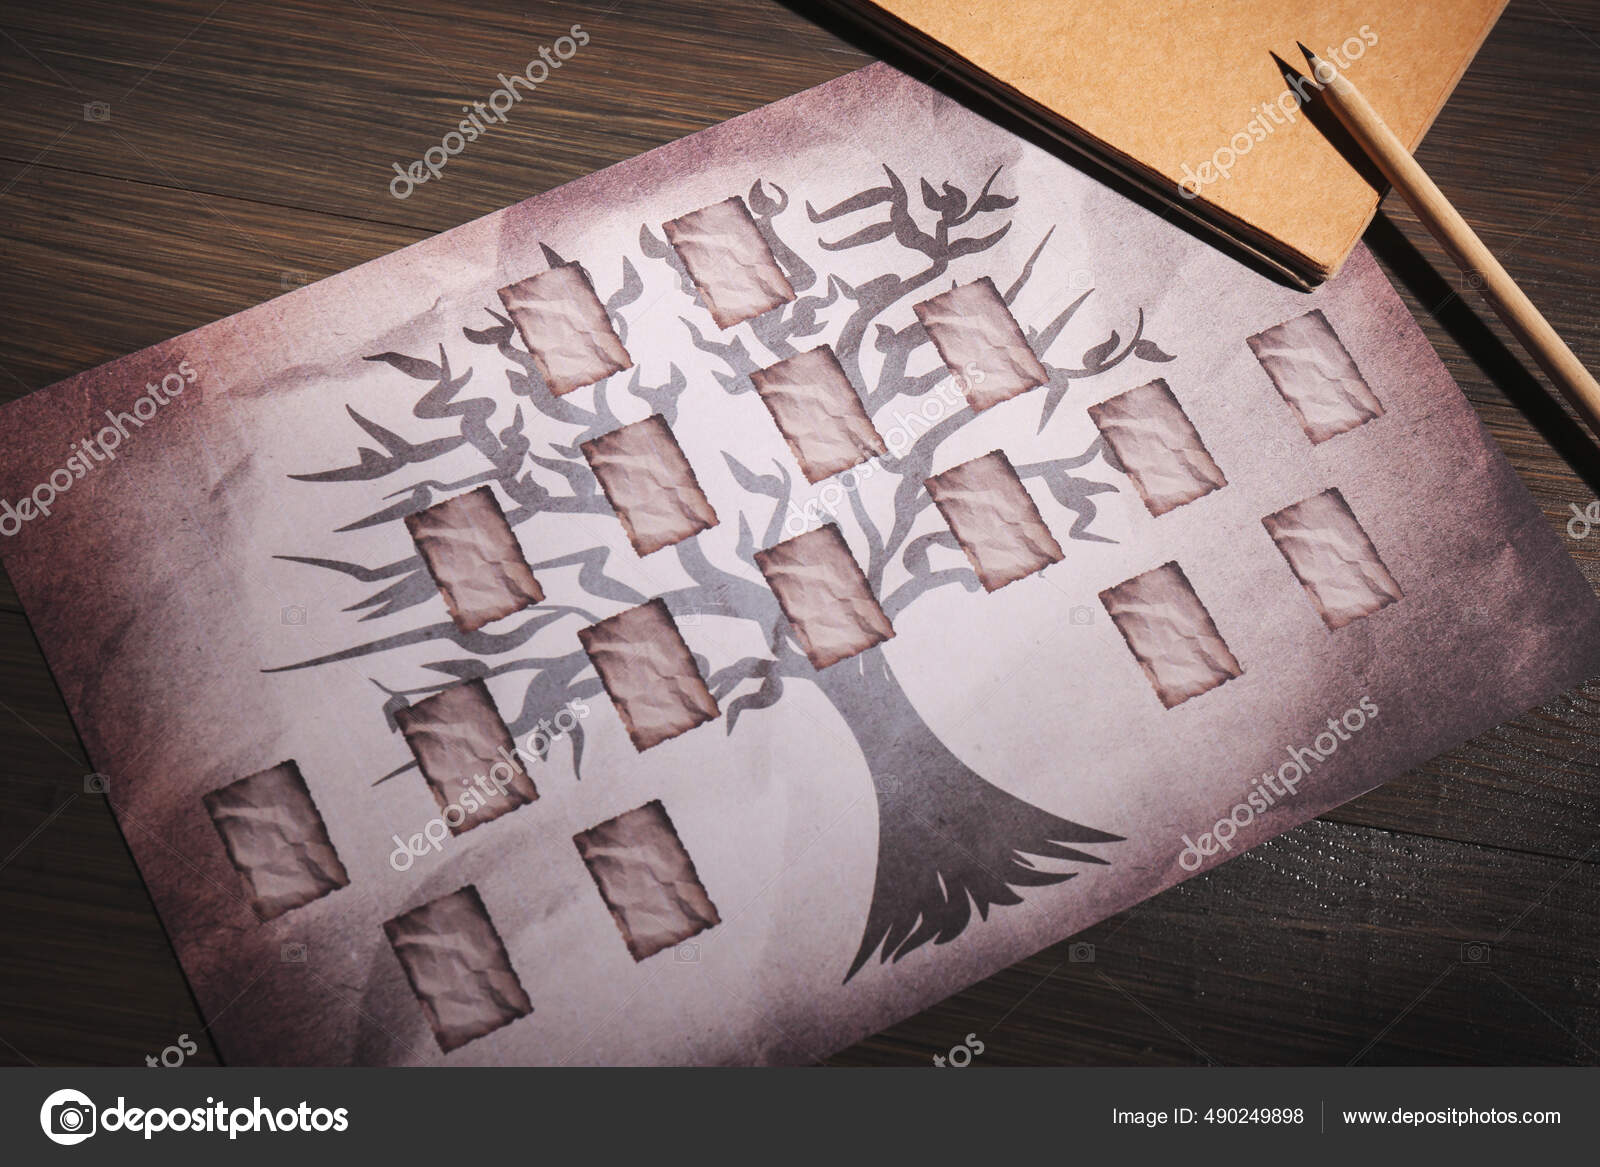 Blank Family Tree Notebook Pencil Wooden Table Stock Photo by